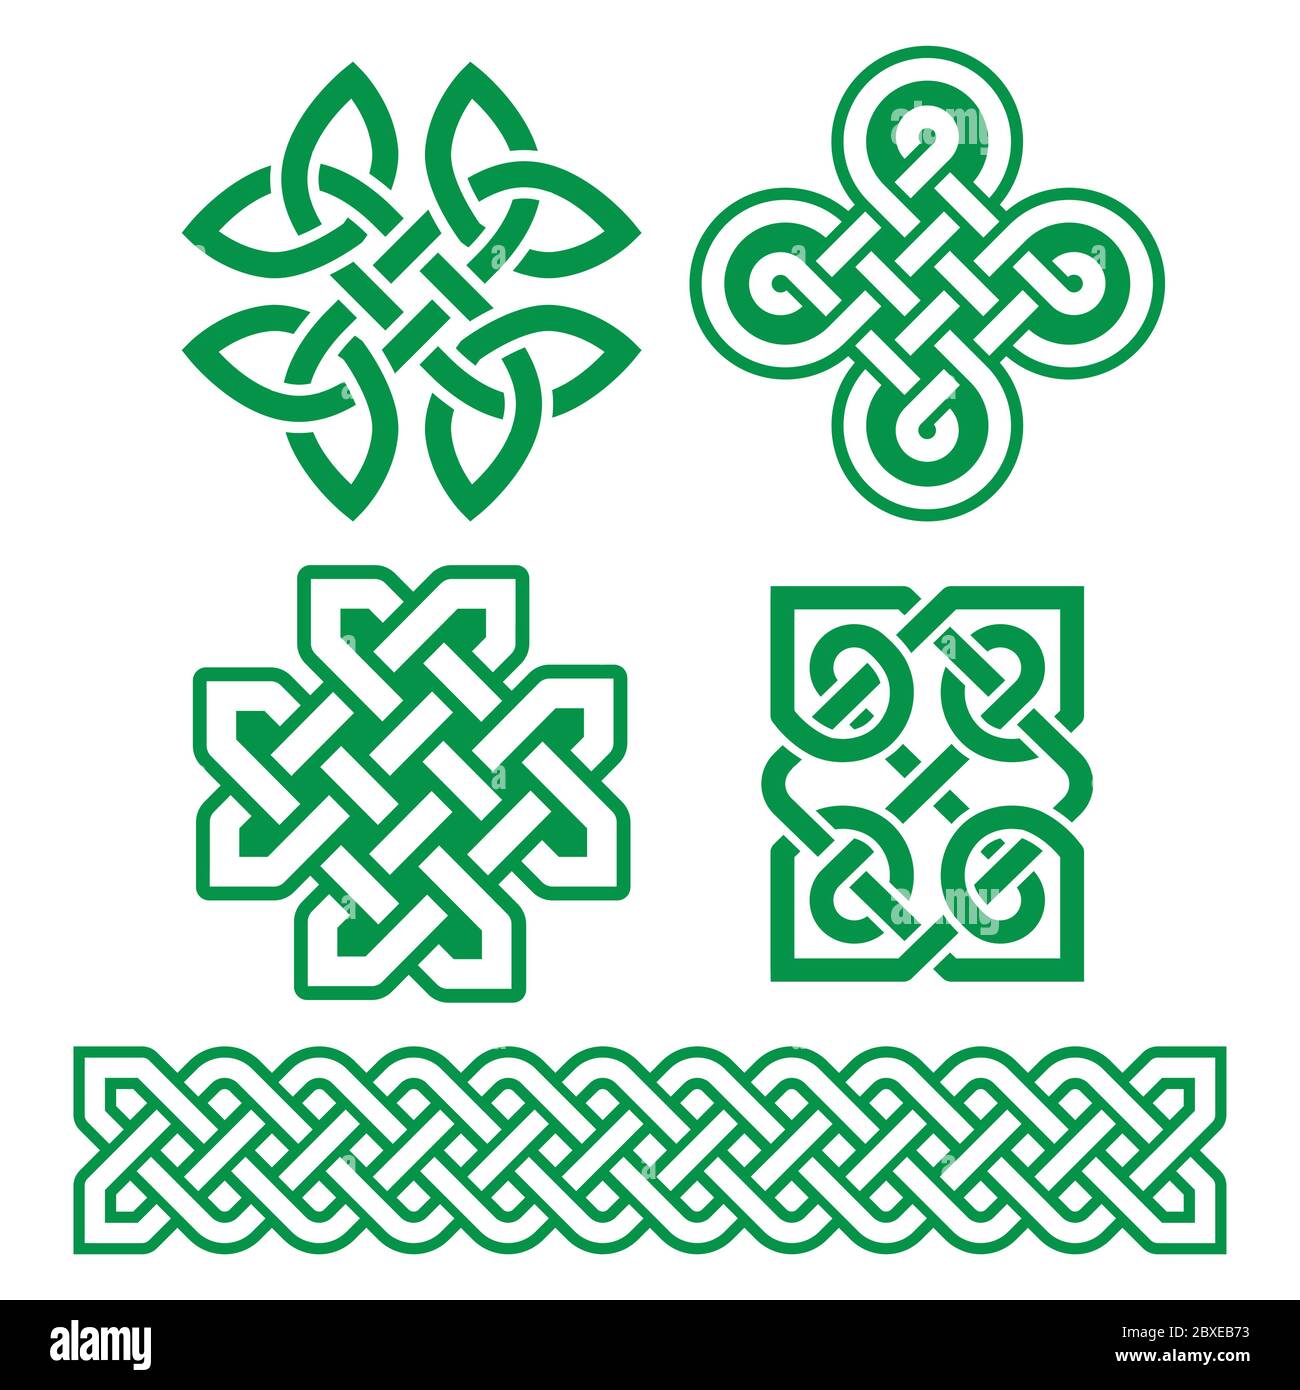 Celtic Irish patterns and braids - vector design set, traditonal Celtic knots and braids collection Stock Vector